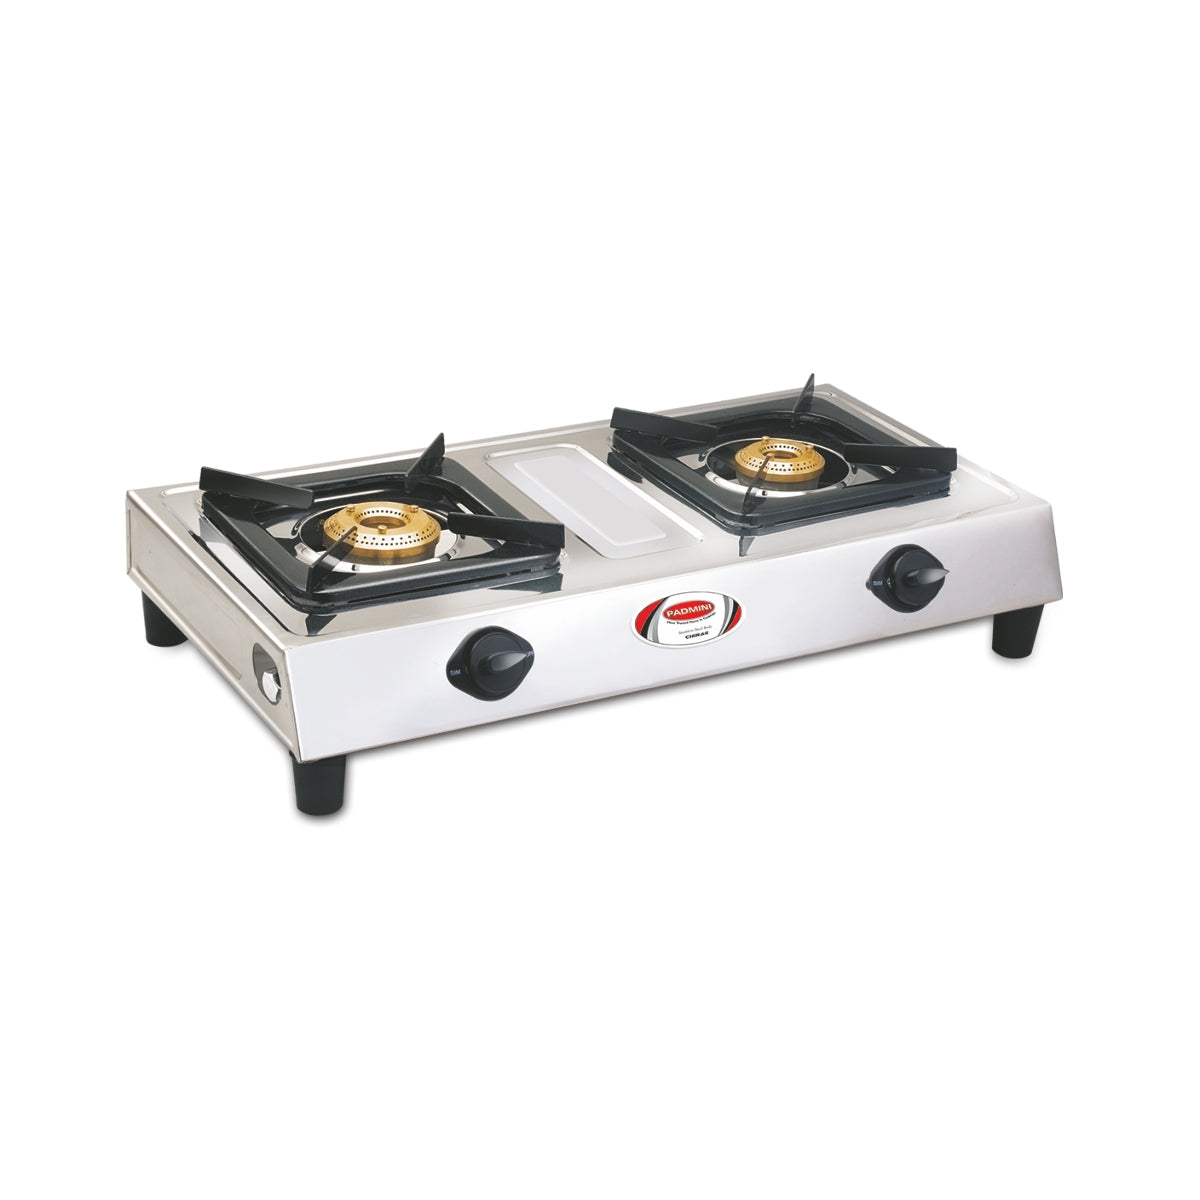 PADMINI Stainless Steel Gas Stove 2BR Chirag